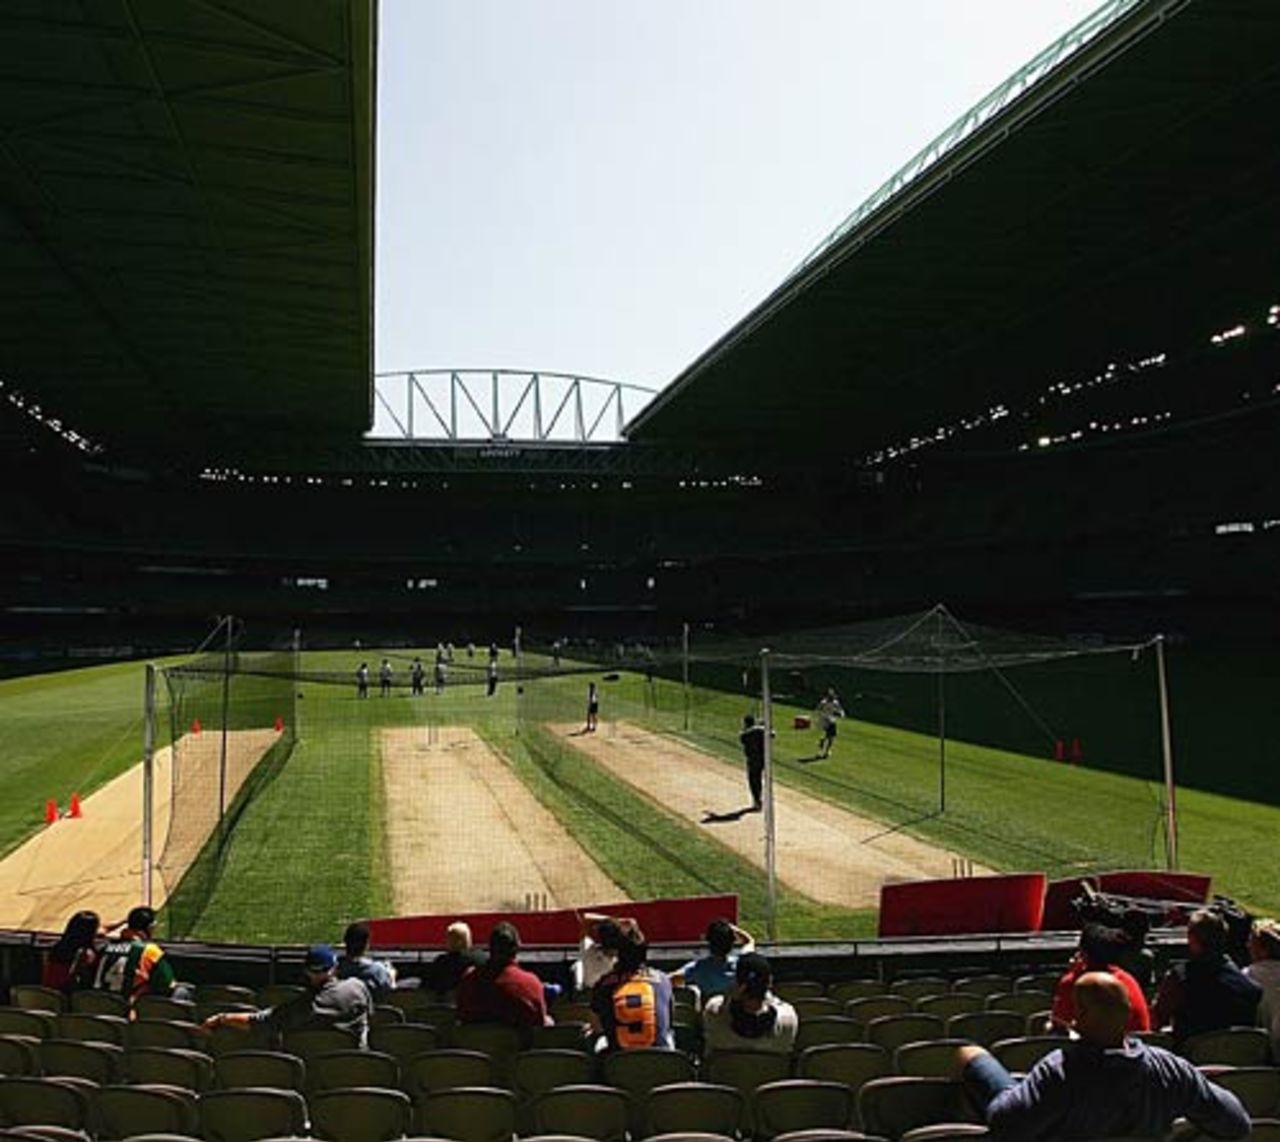 The roof opens during a World XI training session at Telstra dome, Melbourne, October 4, 2005